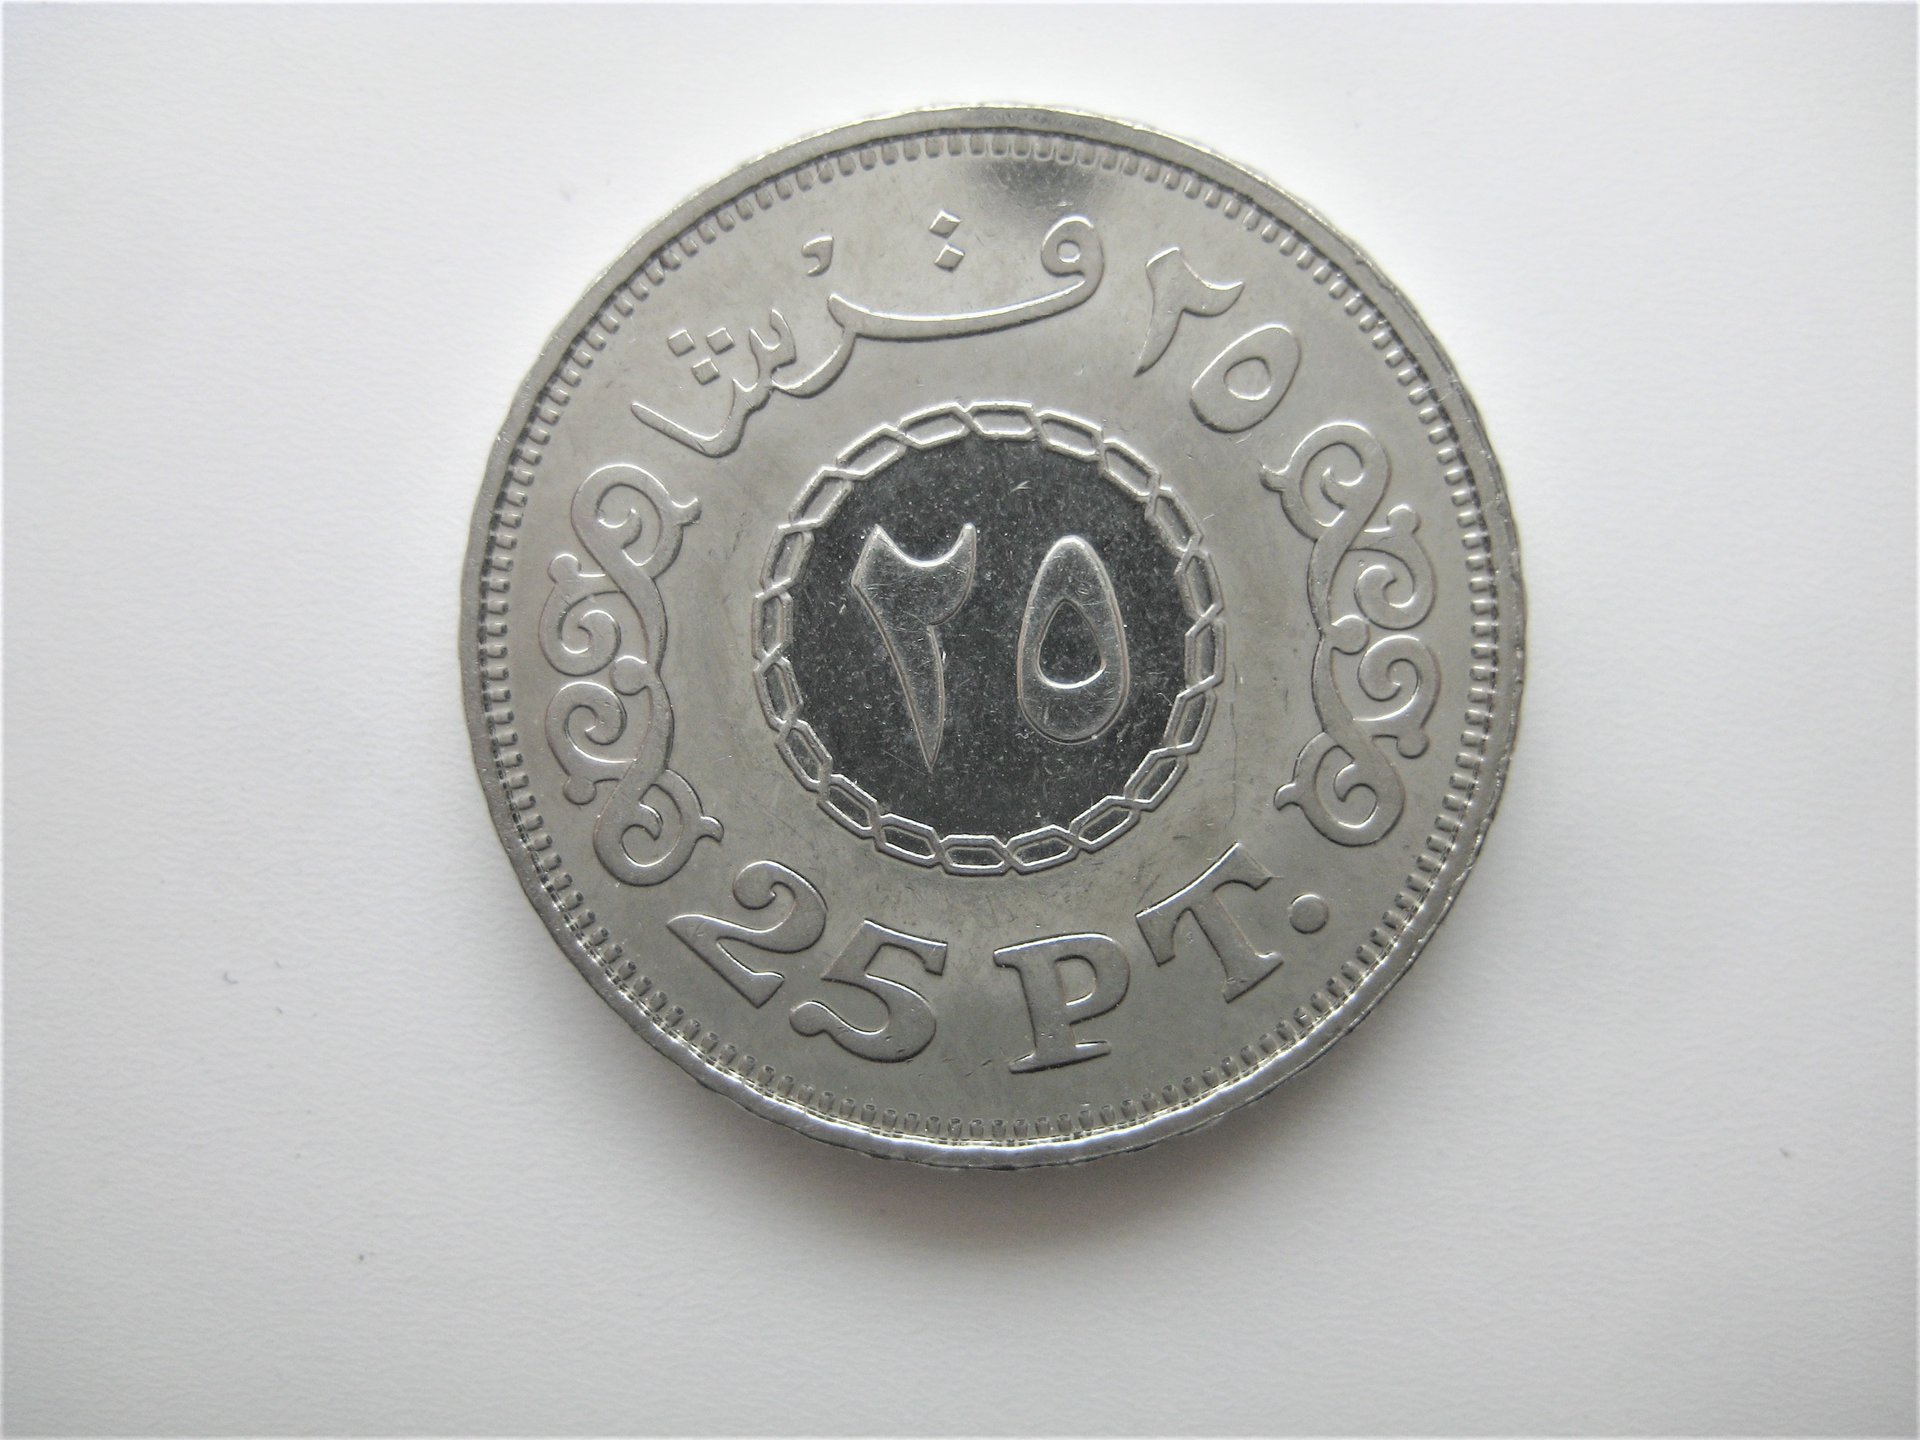 Undated Egypt Egyptian Silver-colored 25 Piastres Coin 2.JPG